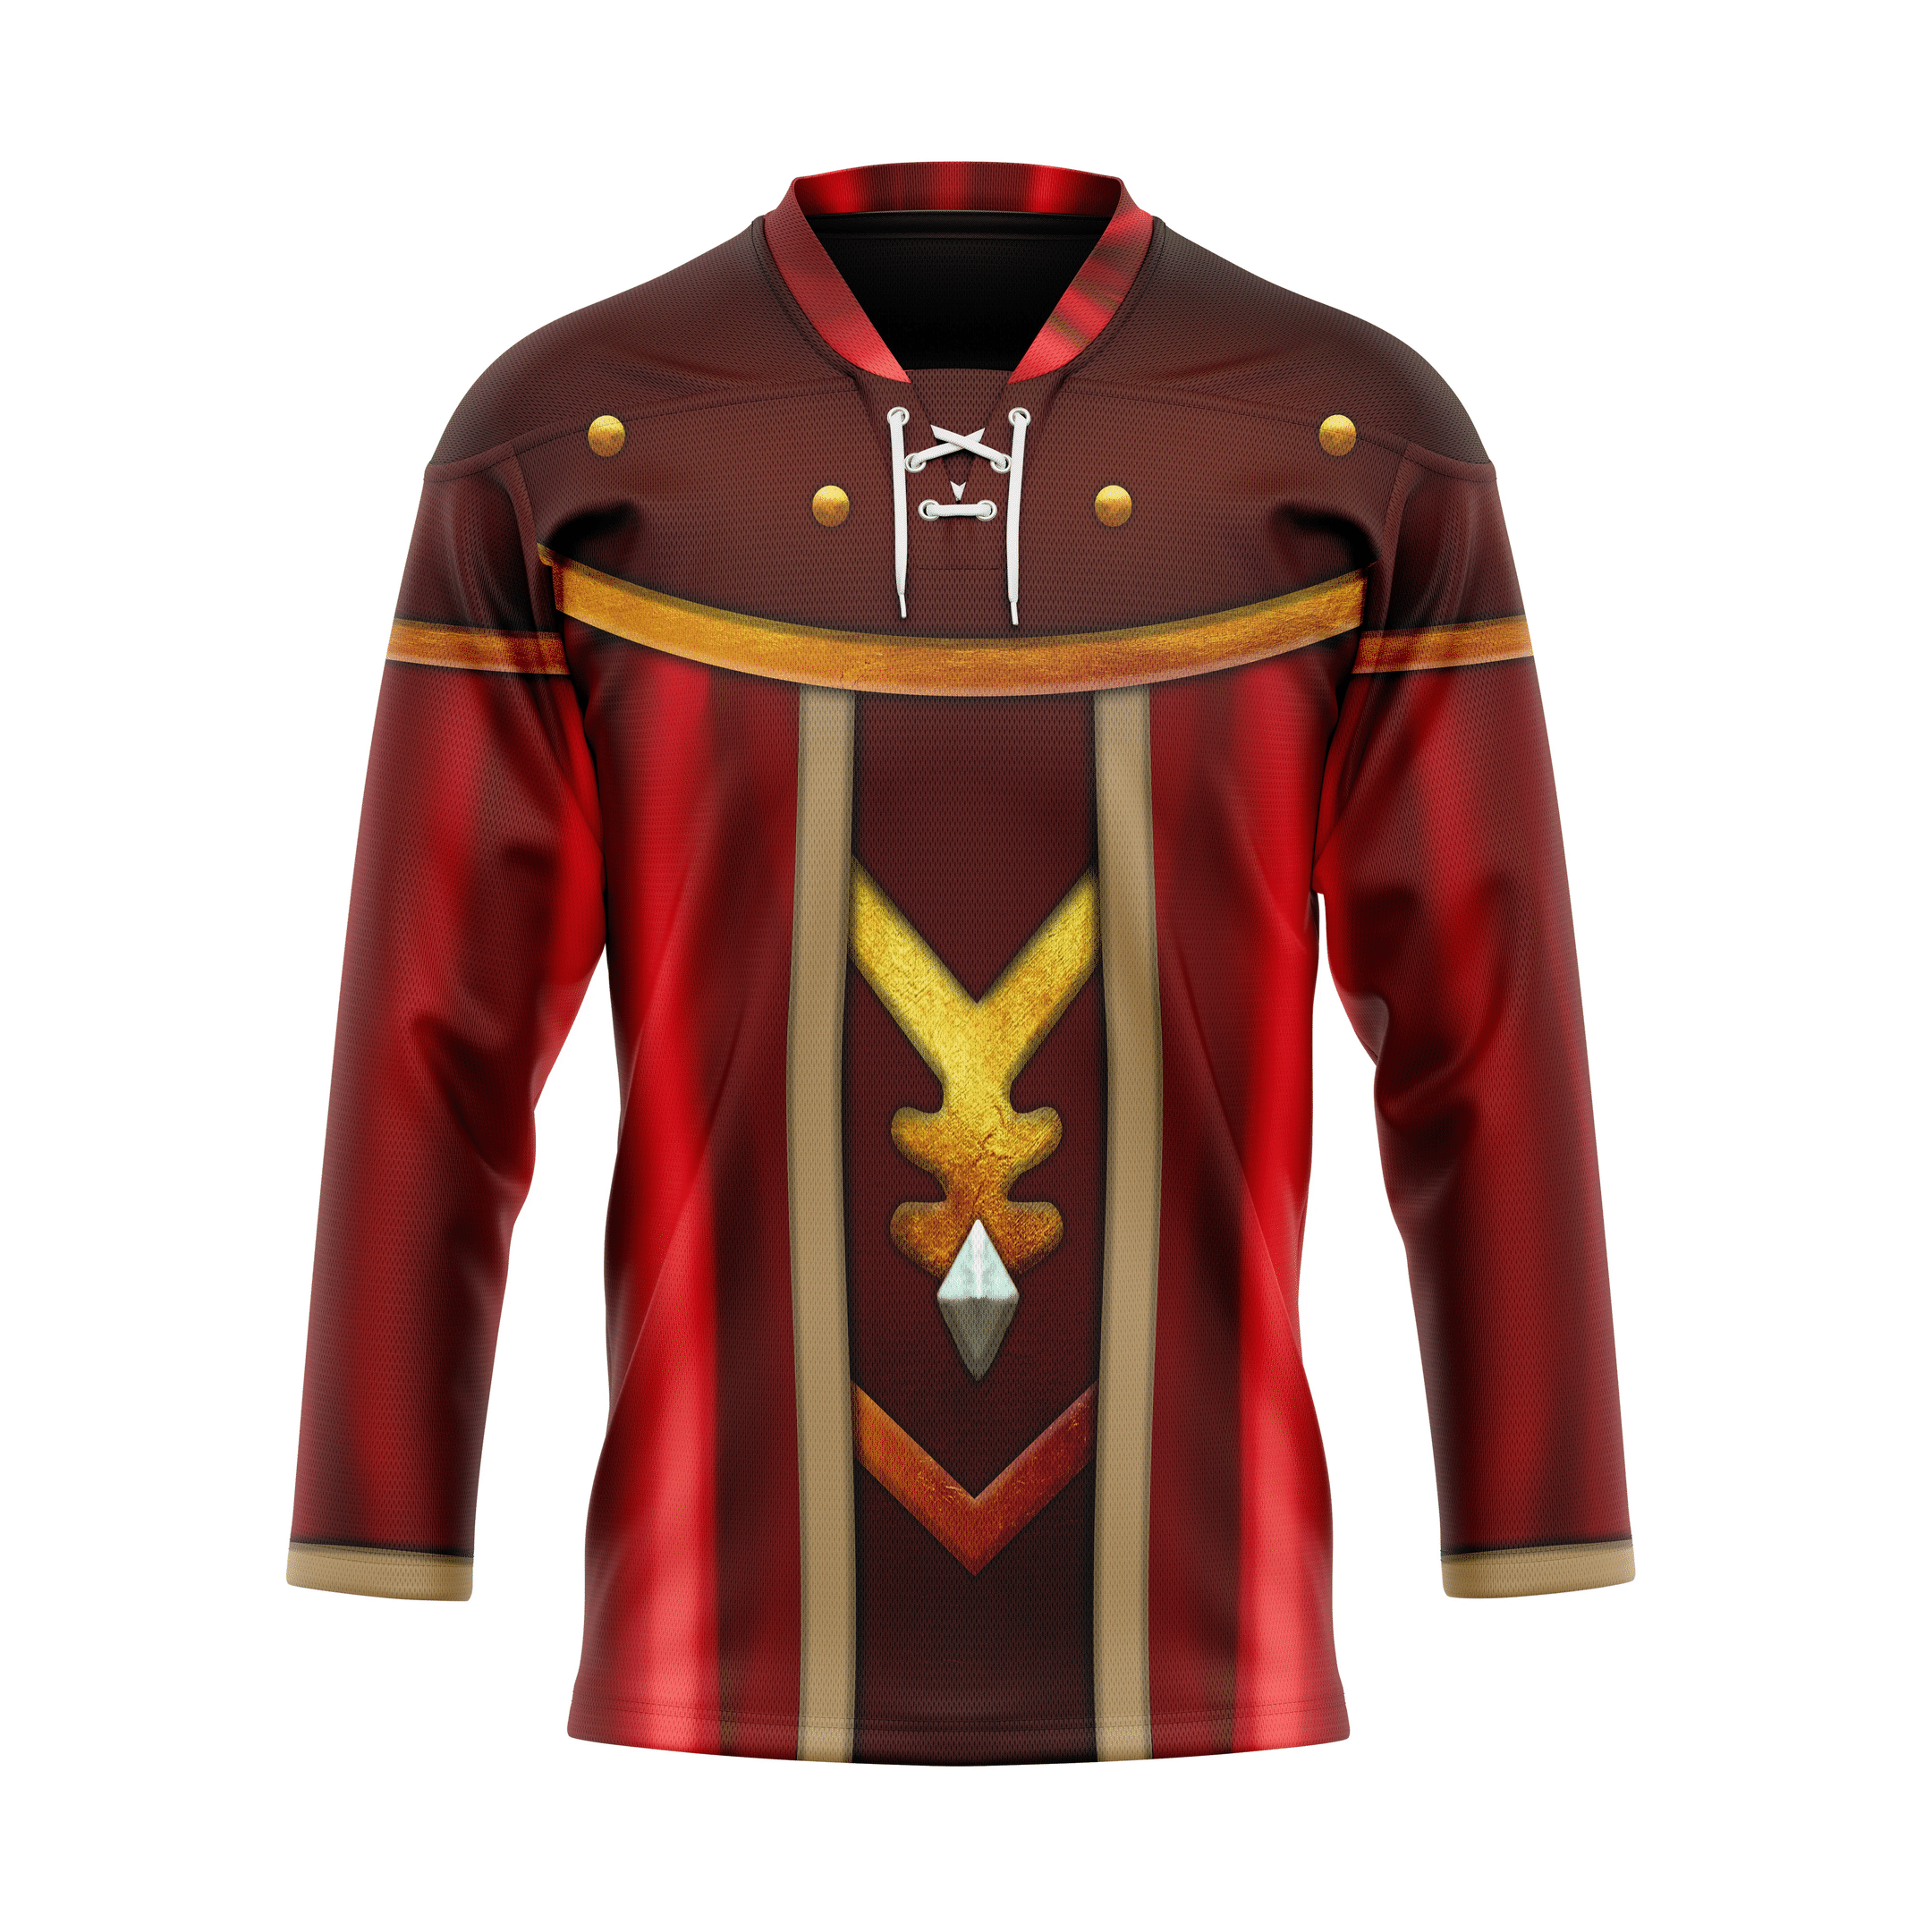 Top hot hockey jersey for NHL fans You can find out more at the bottom of the page! 83